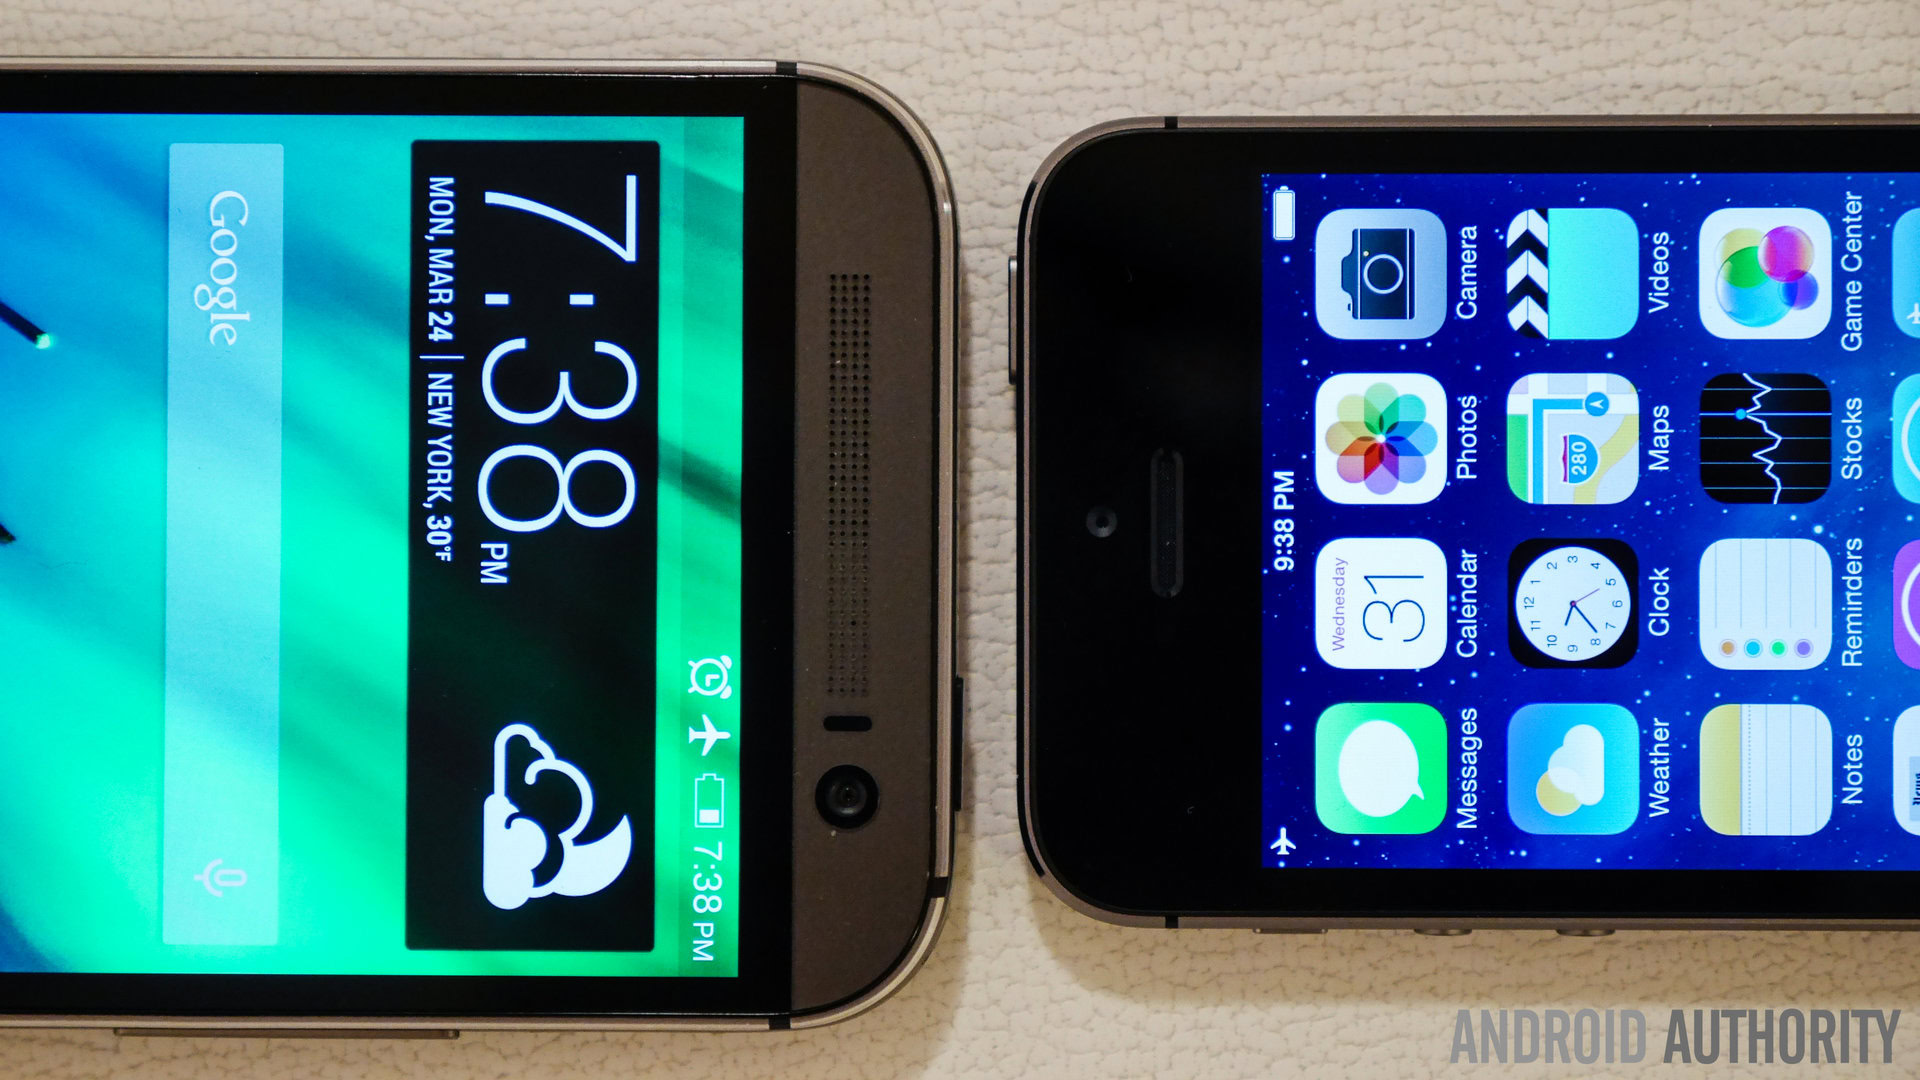 htc one m8 vs iphone 5s quick look aa (8 of 15)